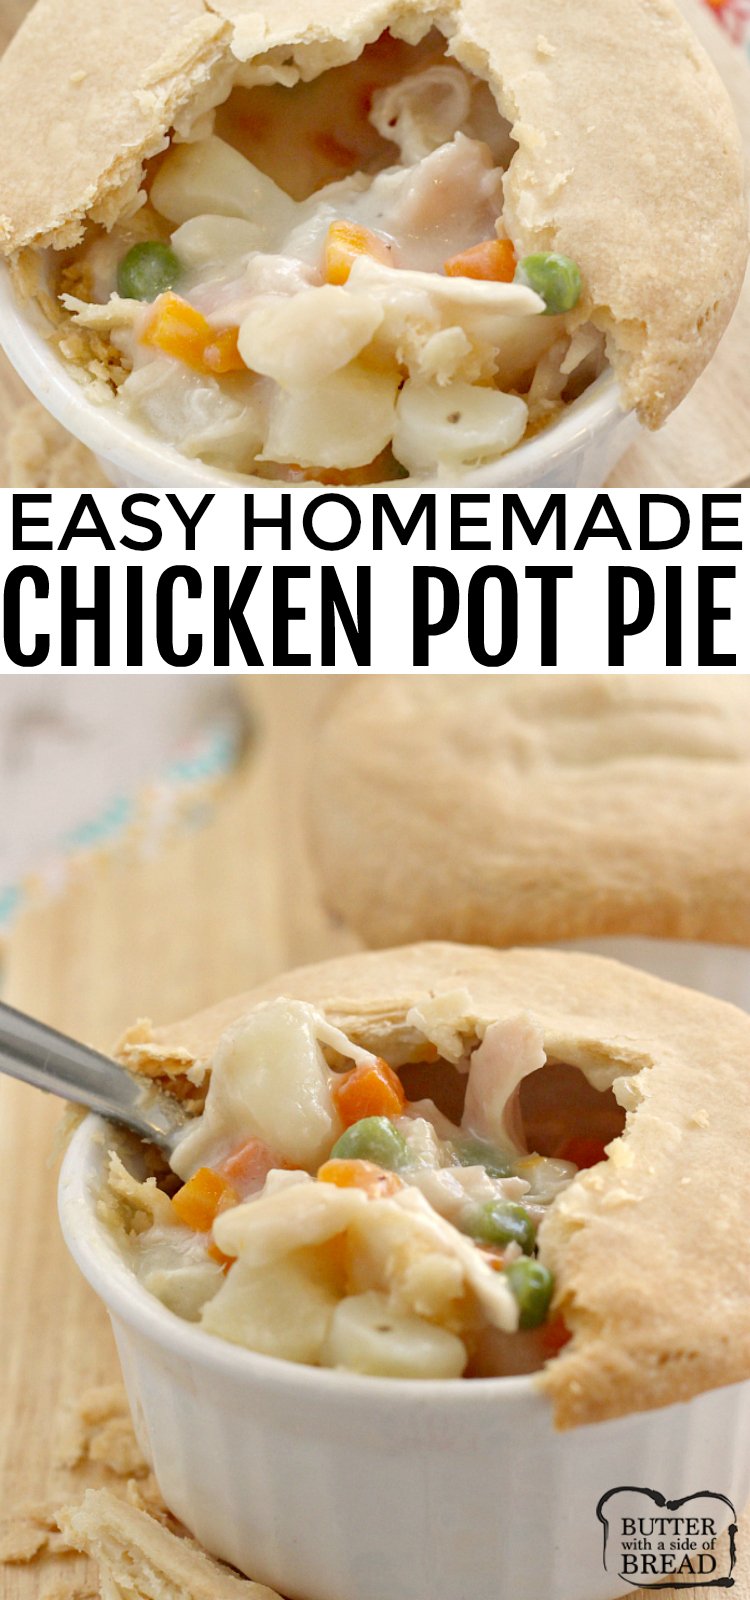 Chicken Pot Pie is the ultimate comfort food full of chicken and vegetables in a creamy sauce covered with a flaky pie crust. This Chicken Pot Pie recipe is a family favorite because it is easy to make and is absolutely delicious too!